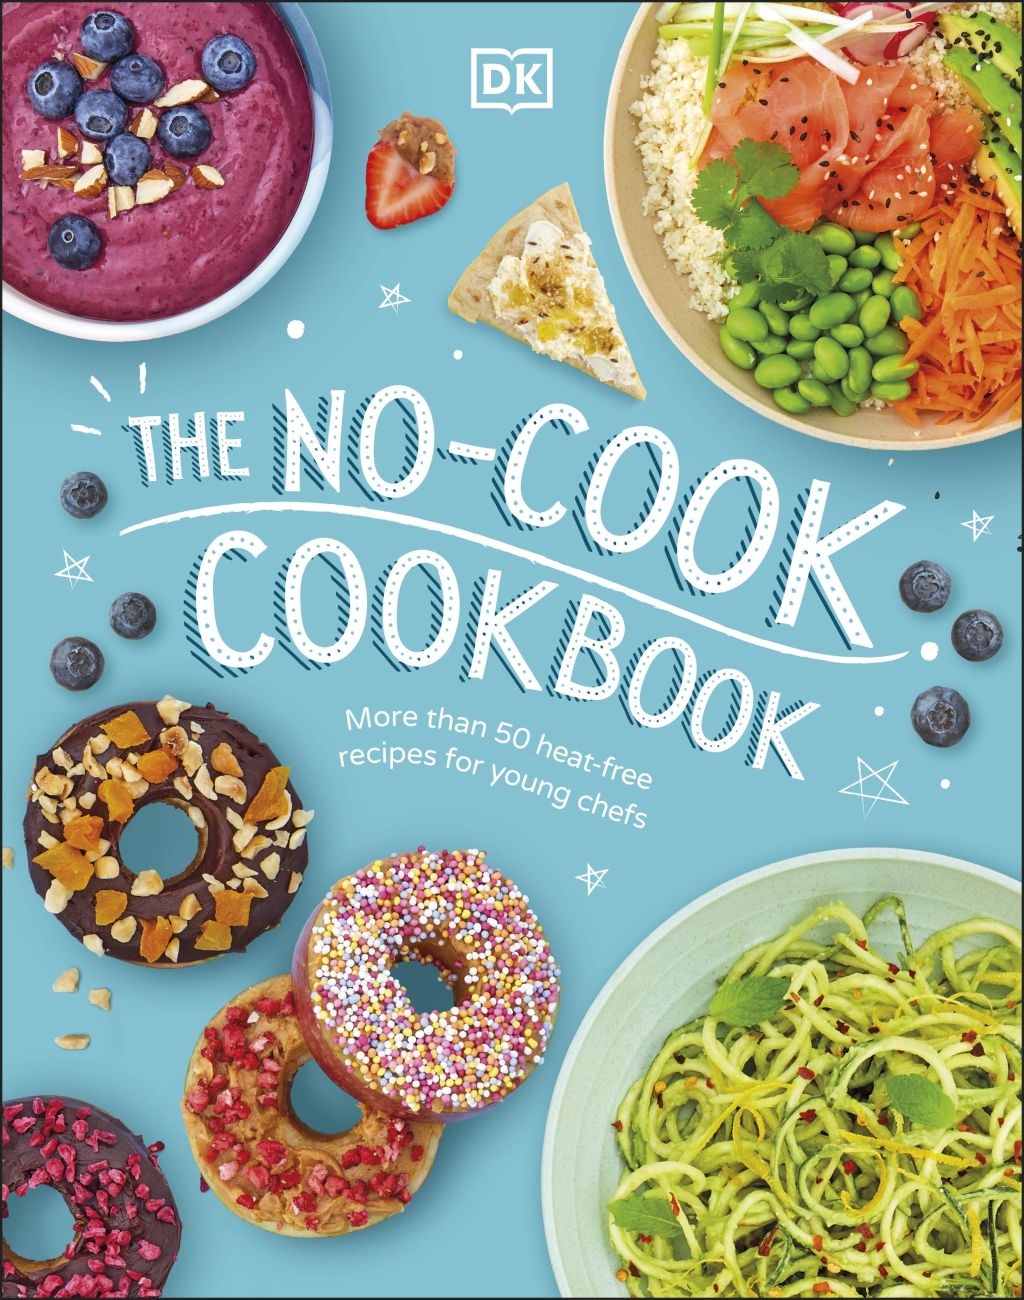 DK The No Cook Cookbook – more than 50 recipes for young chefs